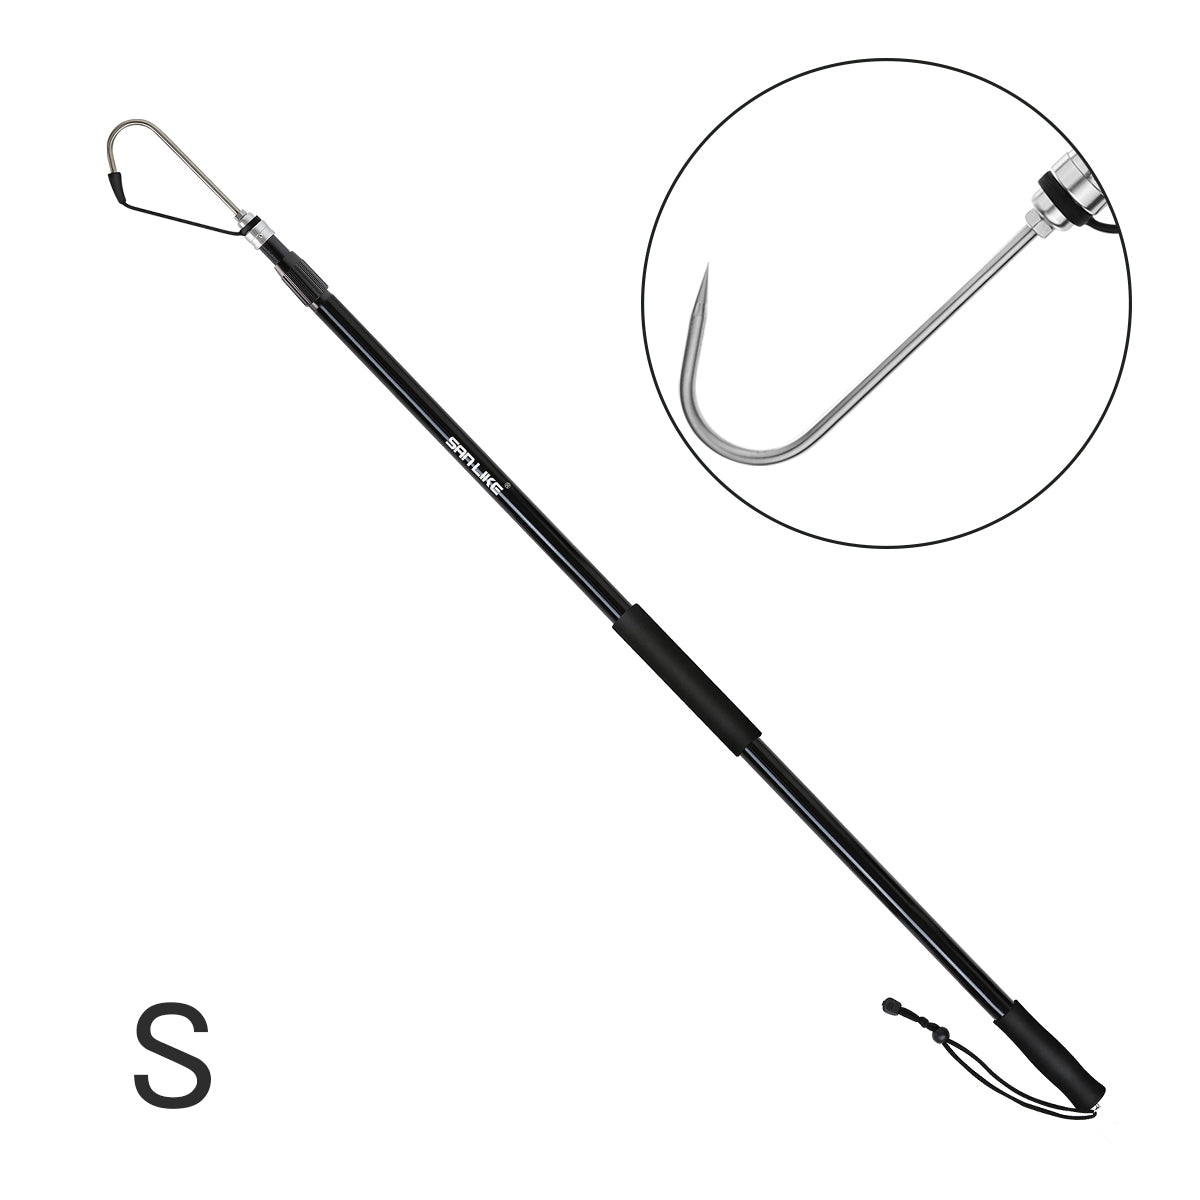 Generic Retractable Fishing Gaff Stainless Steel Hook Fishing Gear Hook  Tackle With Soft Handle Fishing Tools Fishing Gaff Hook New